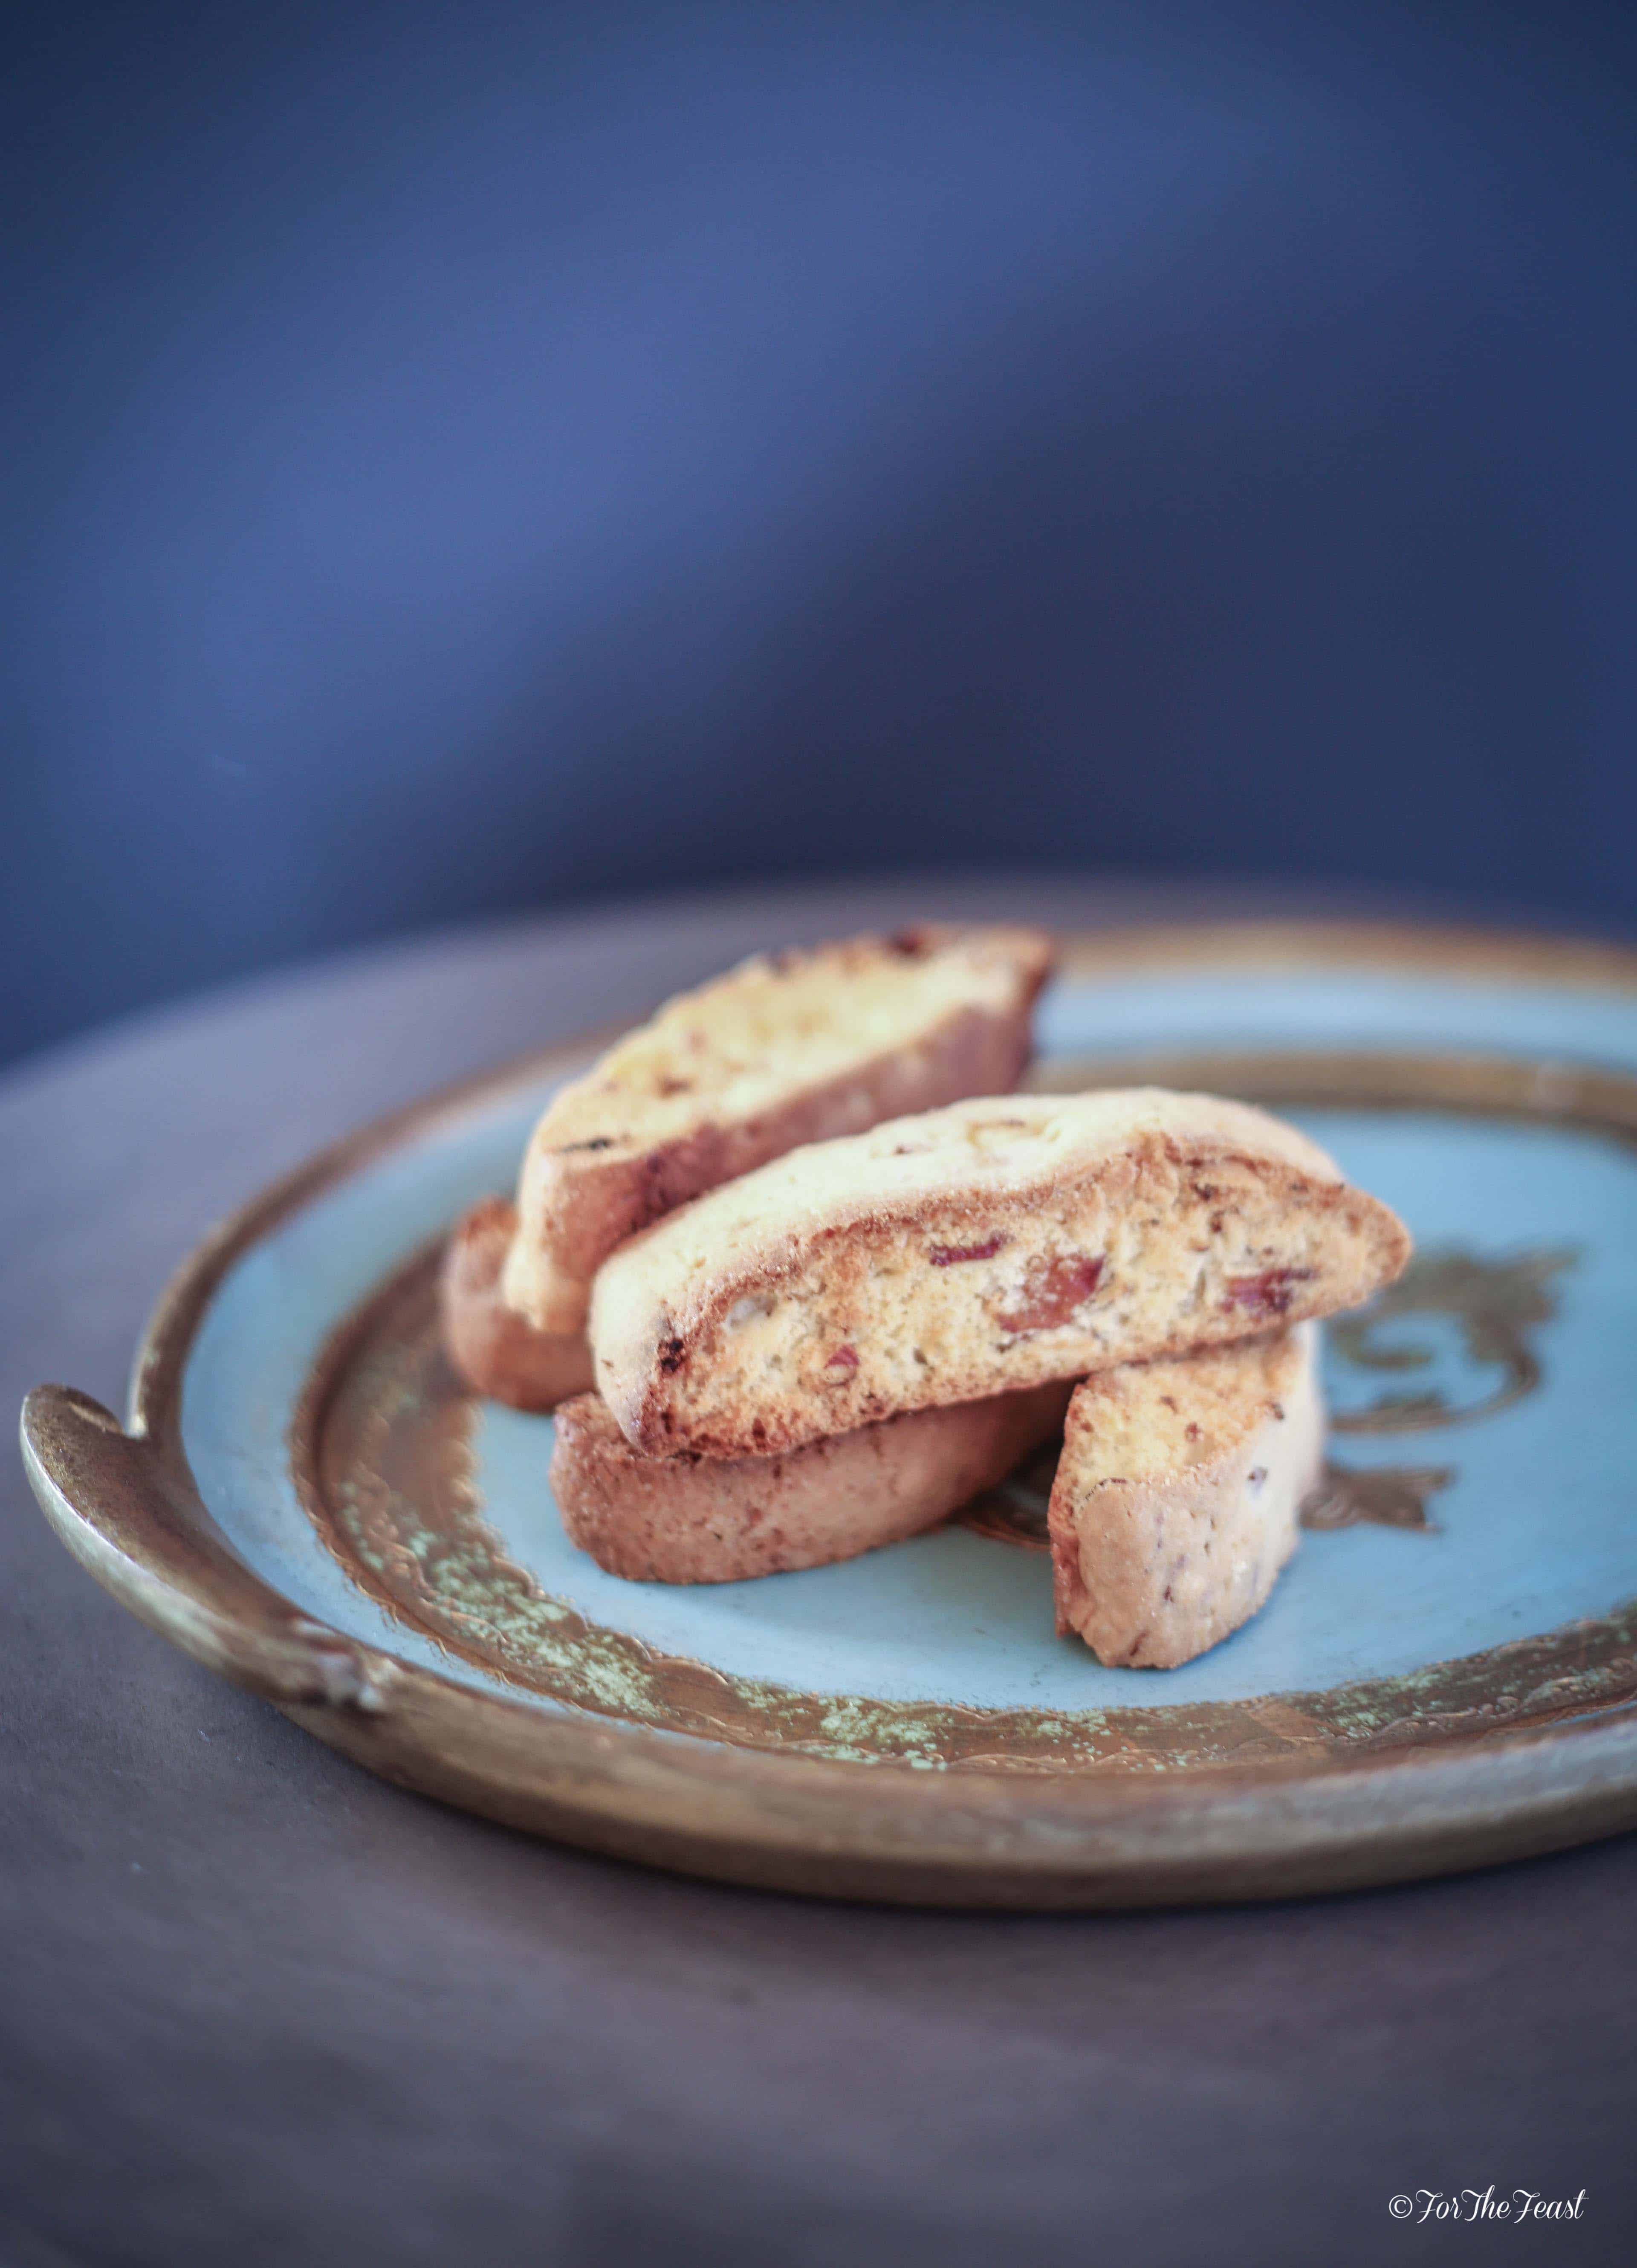 Almond and Apricot Biscotti #forthefeast #cookies #italian